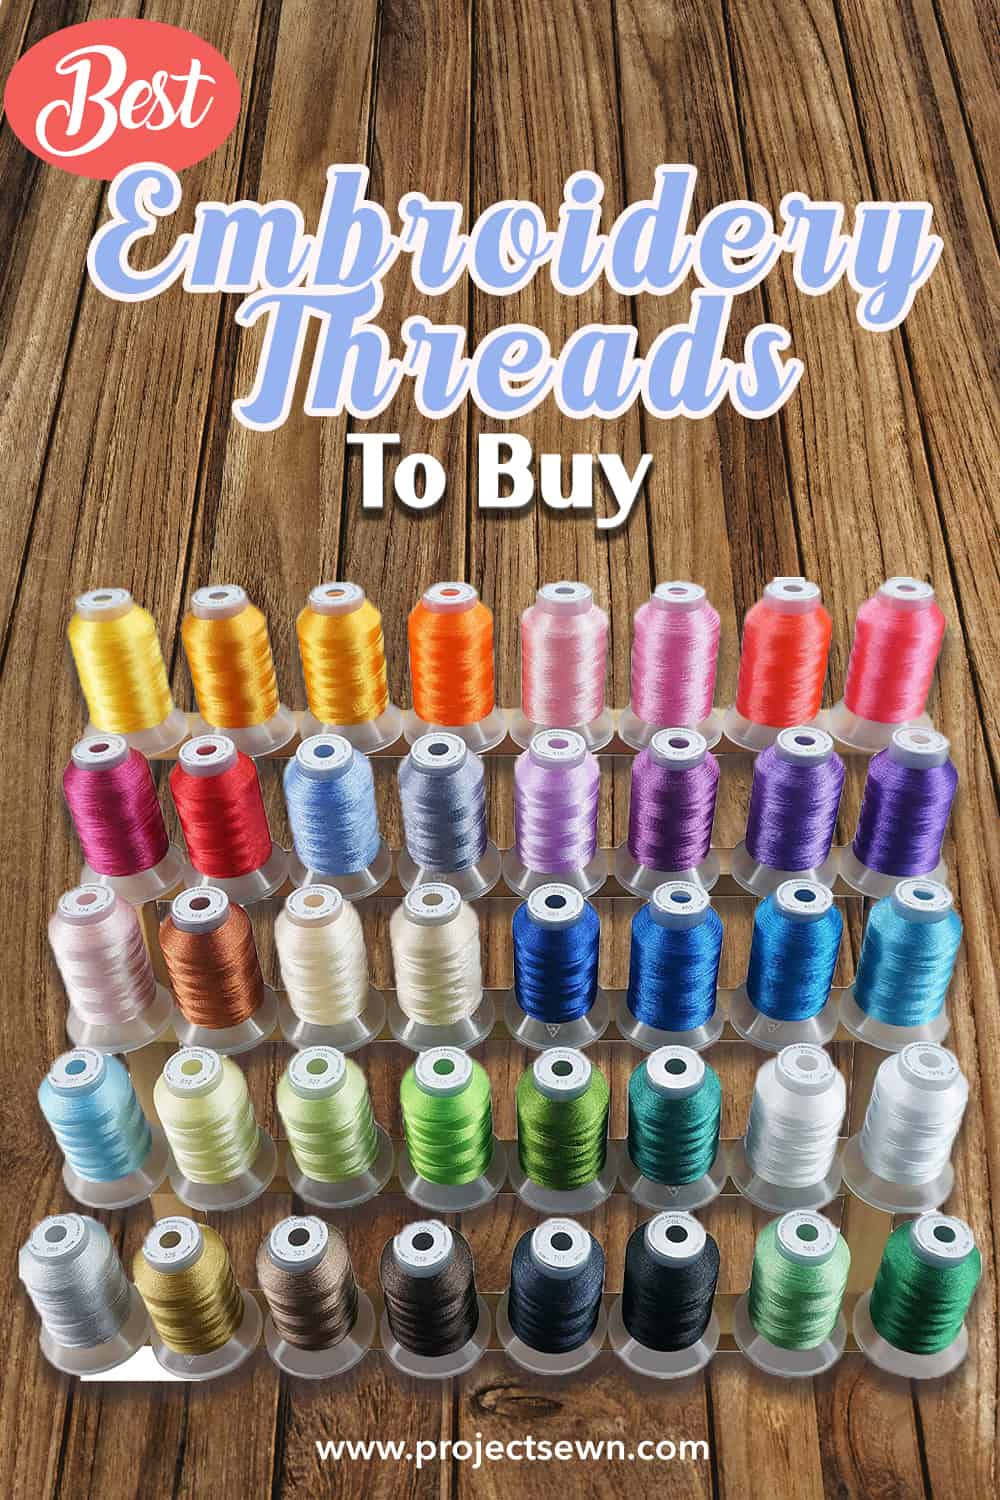 Best Embroidery Threads